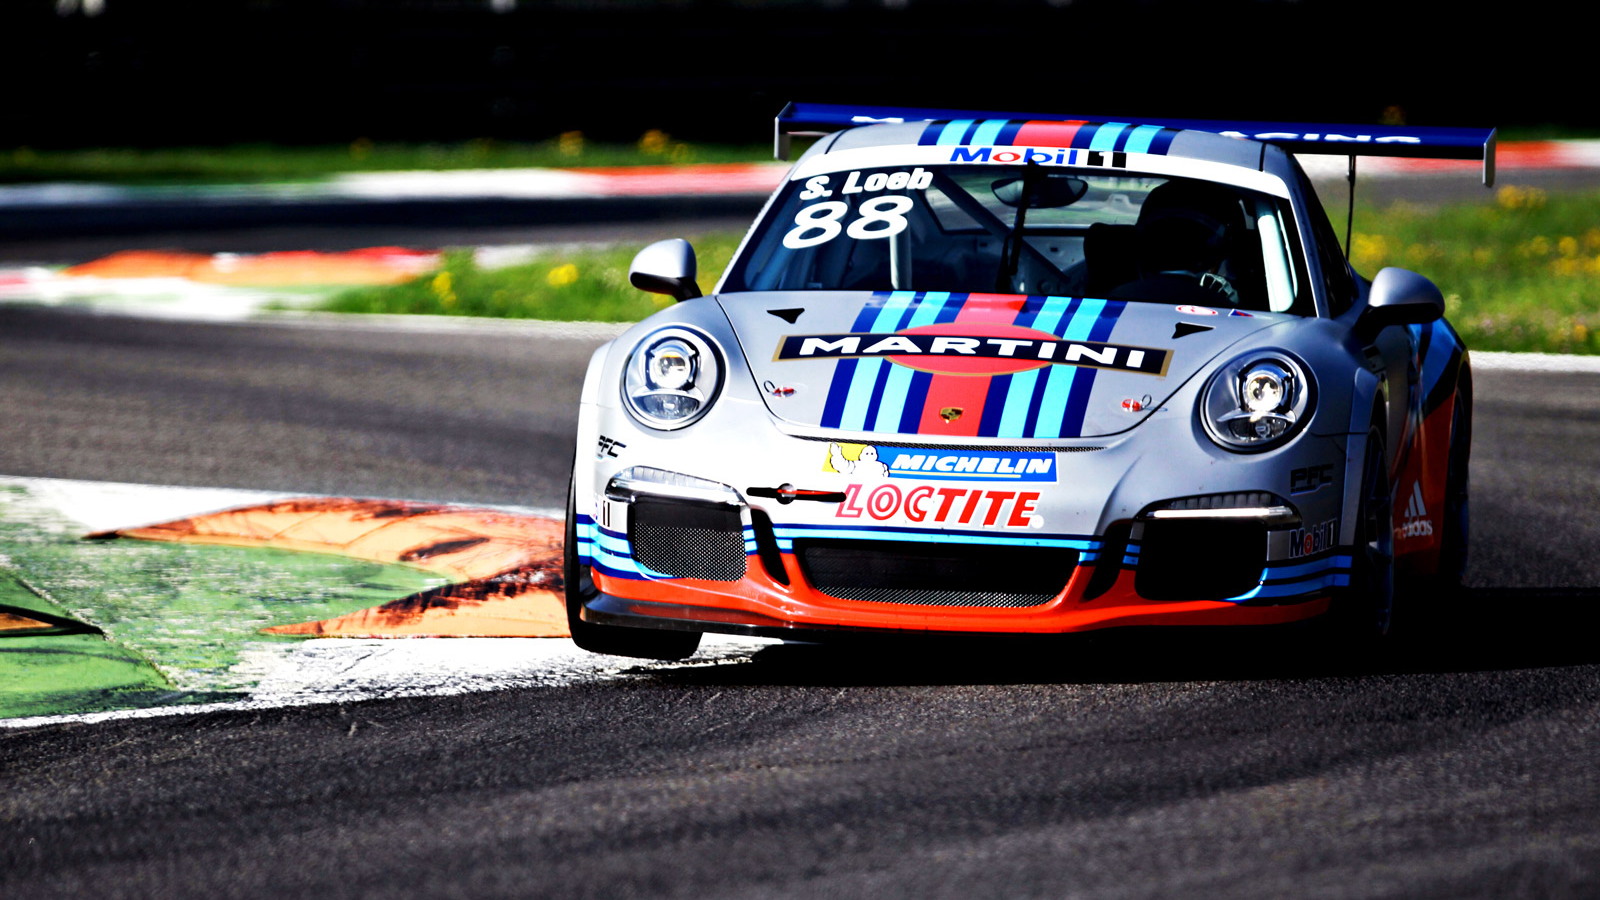 2013 Porsche 911 GT3 Cup with Martini livery